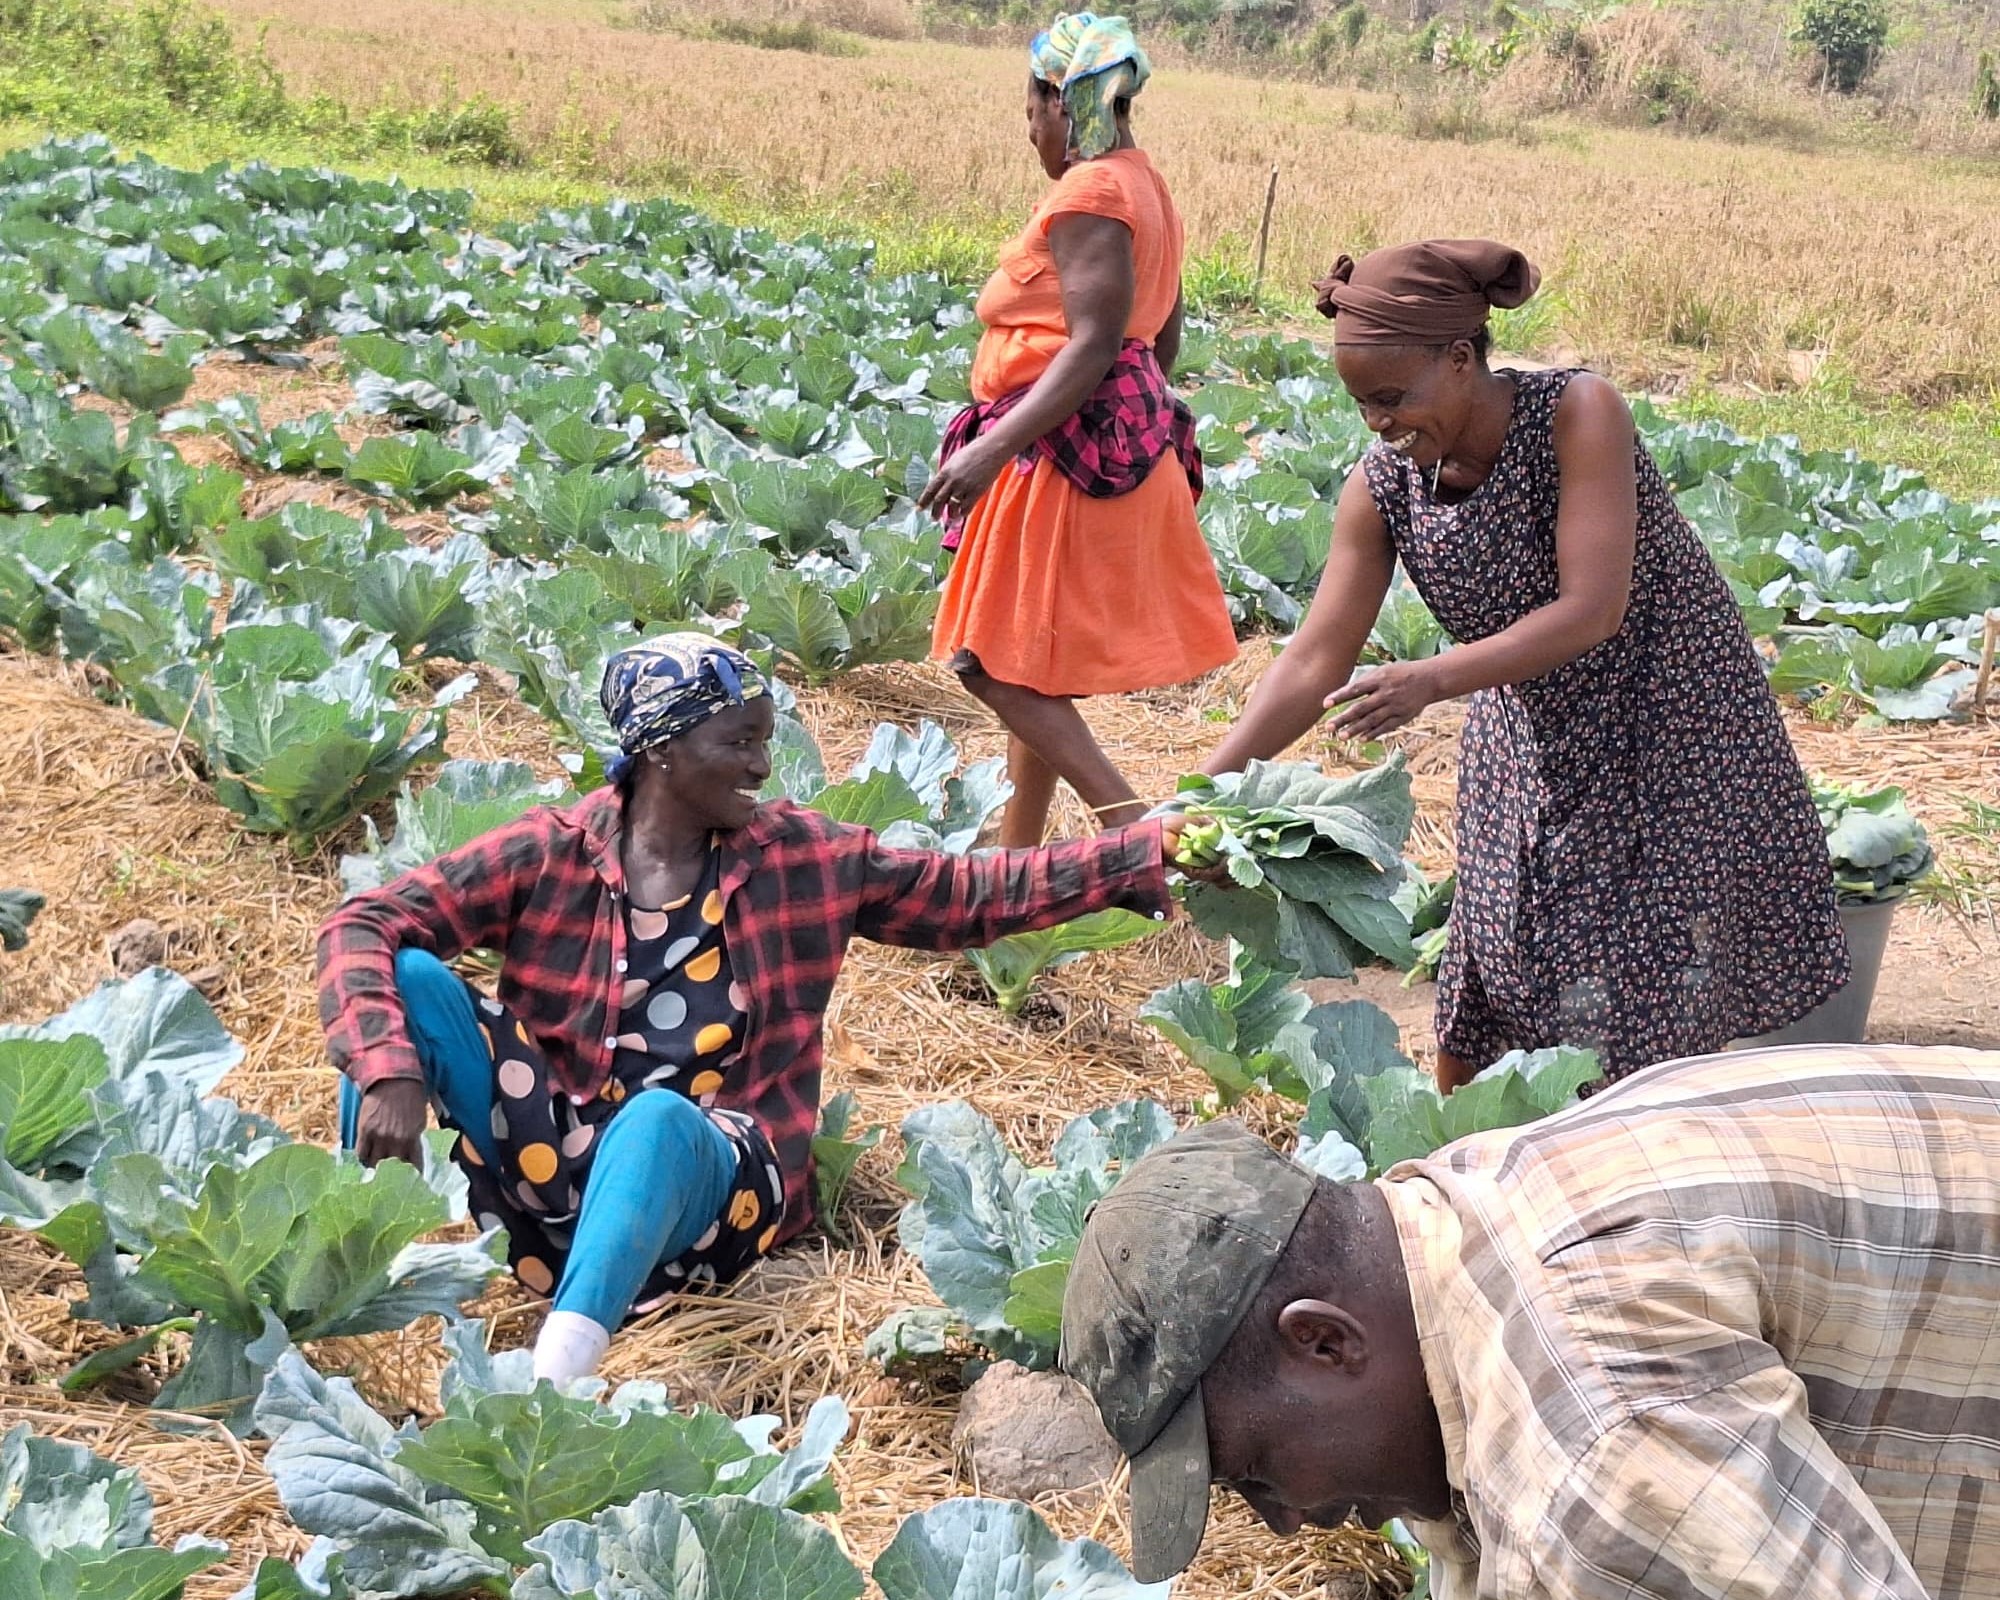 A smiling woman farmer hands a cabbage to another woman in the field, as other farmers work nearby.